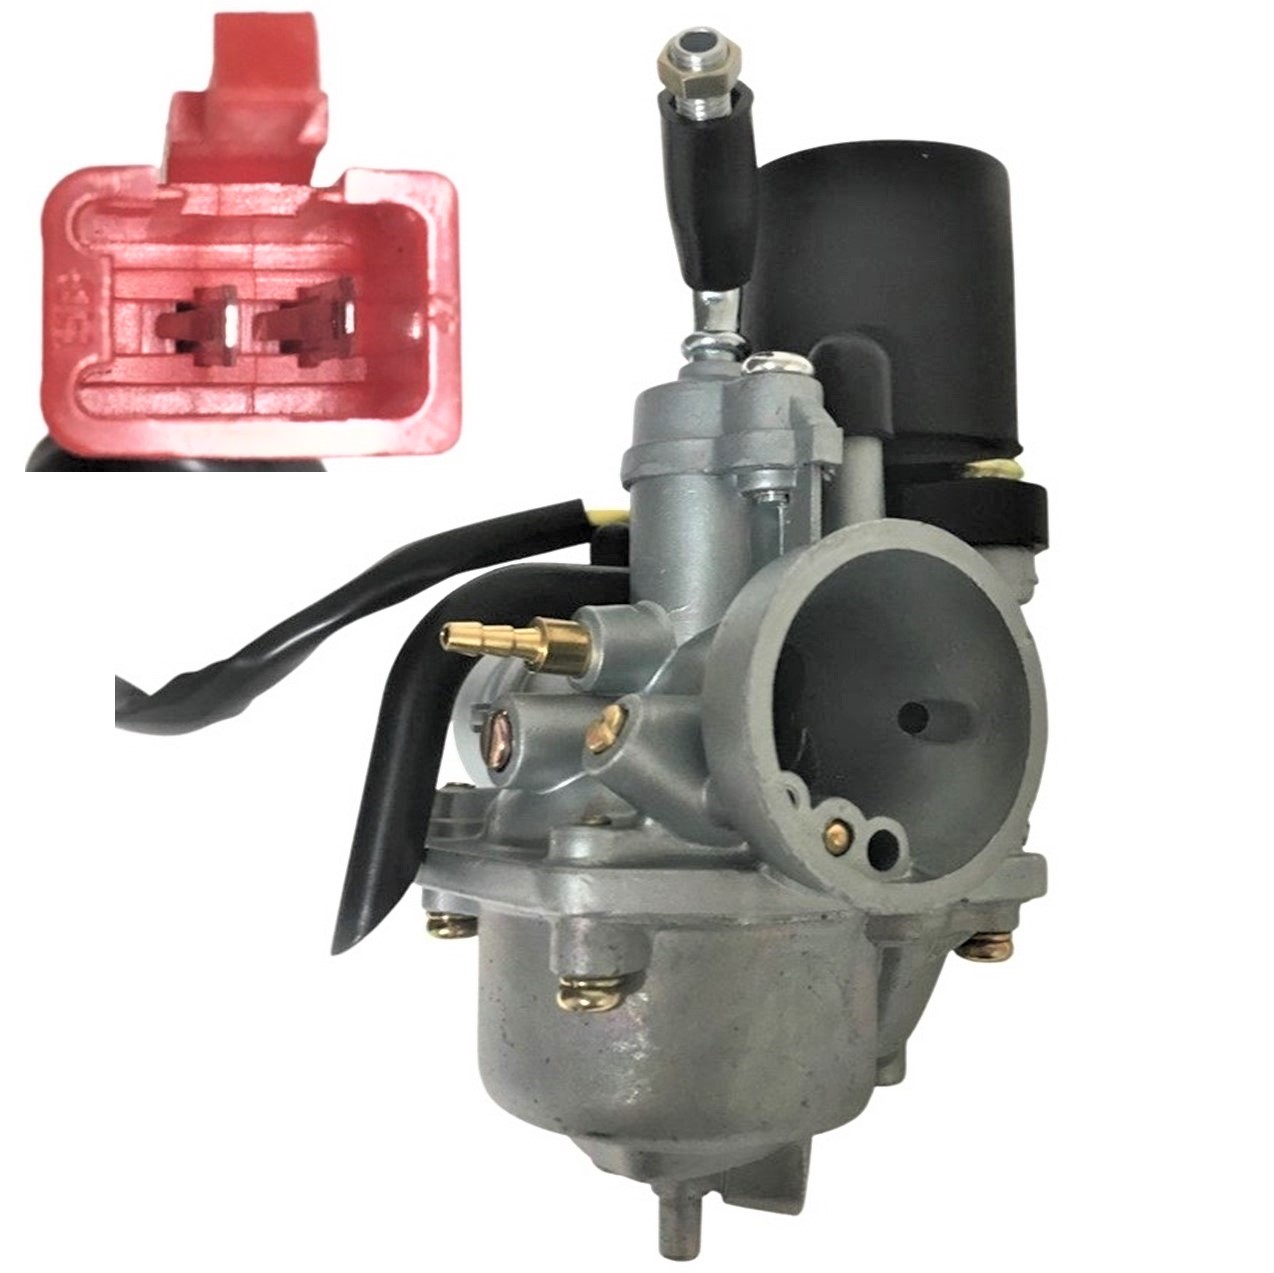 Mikuni Style 18mm 2 Stroke Carburetor with Electric Choke Intake OD=24mm Air OD=38mm Made in China, this is a less expensive alternative for 50,70,90cc 2 Stroke ATVs & Scooters.